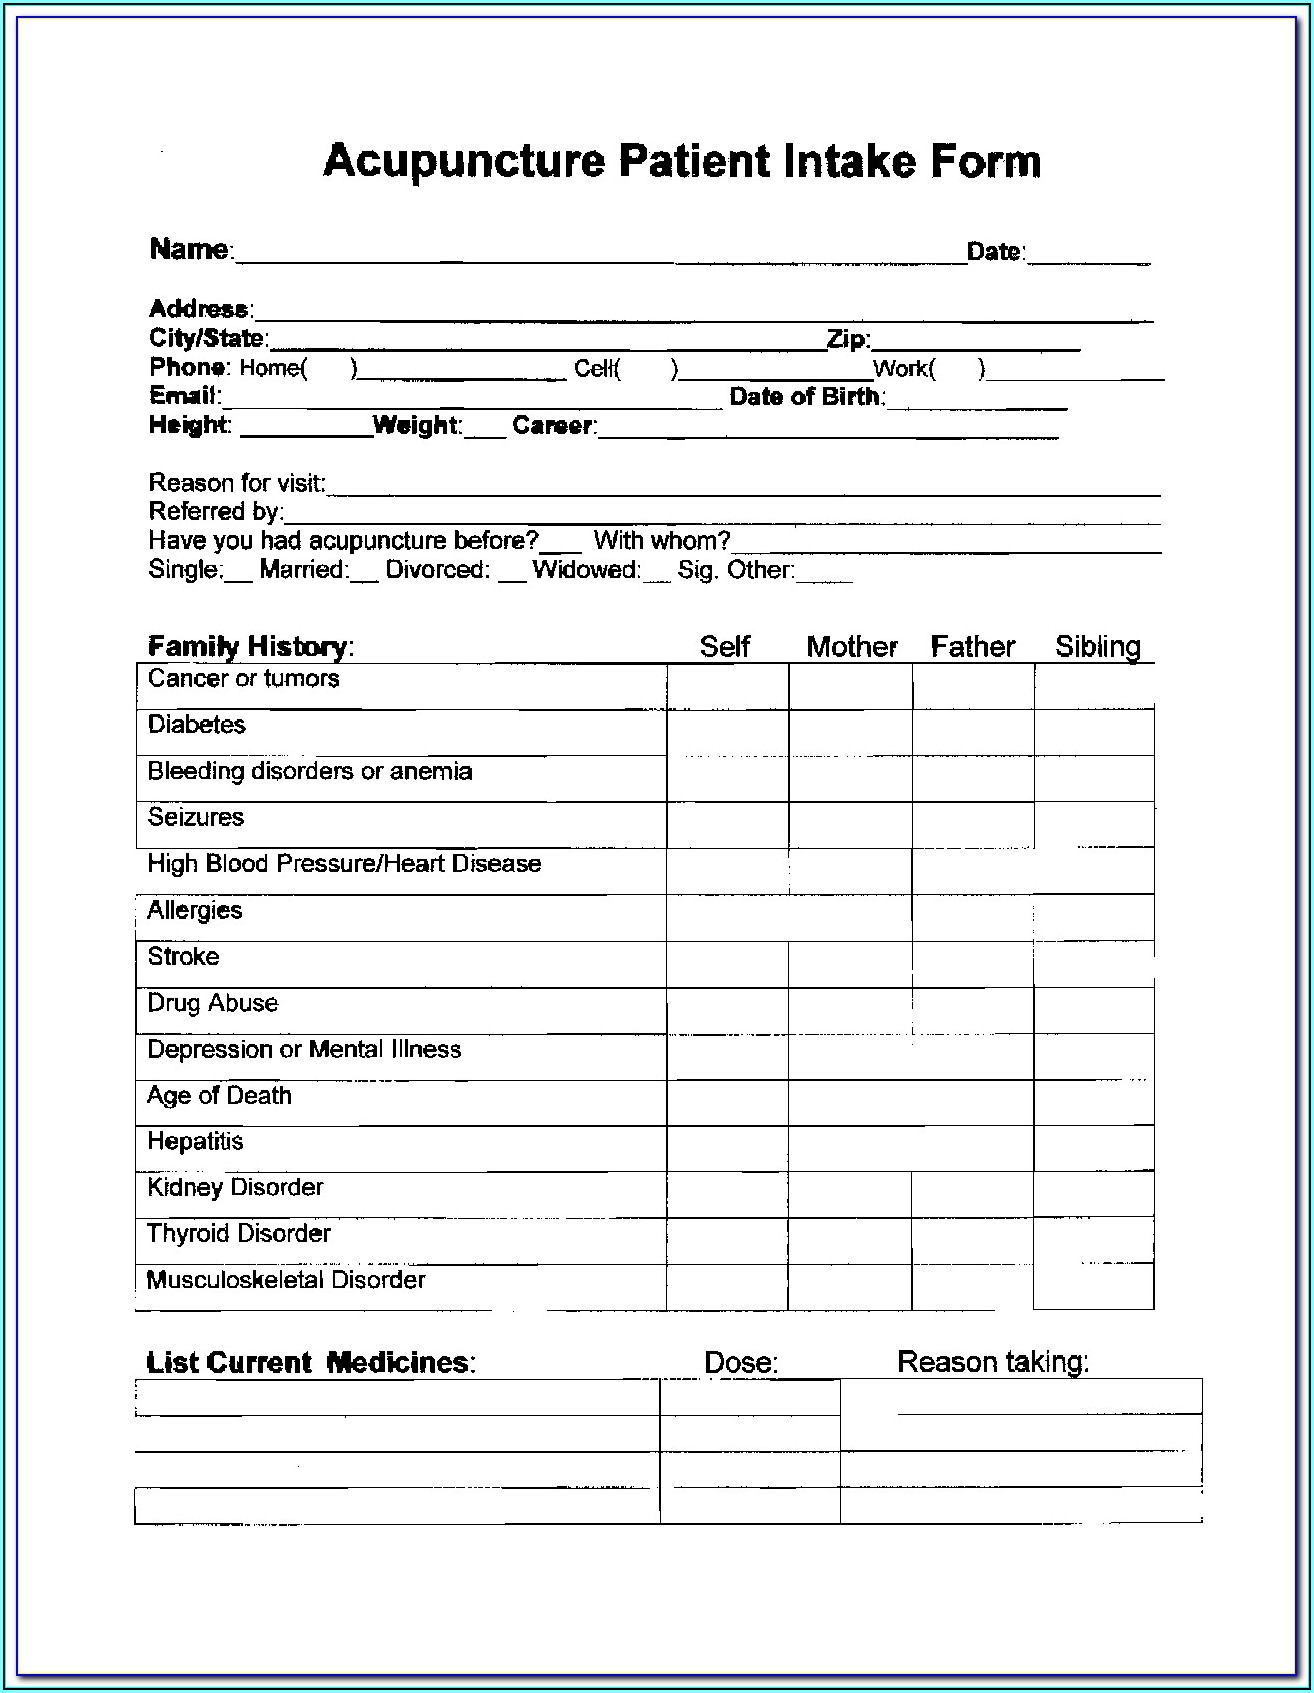 Acupuncture Intake Form Template